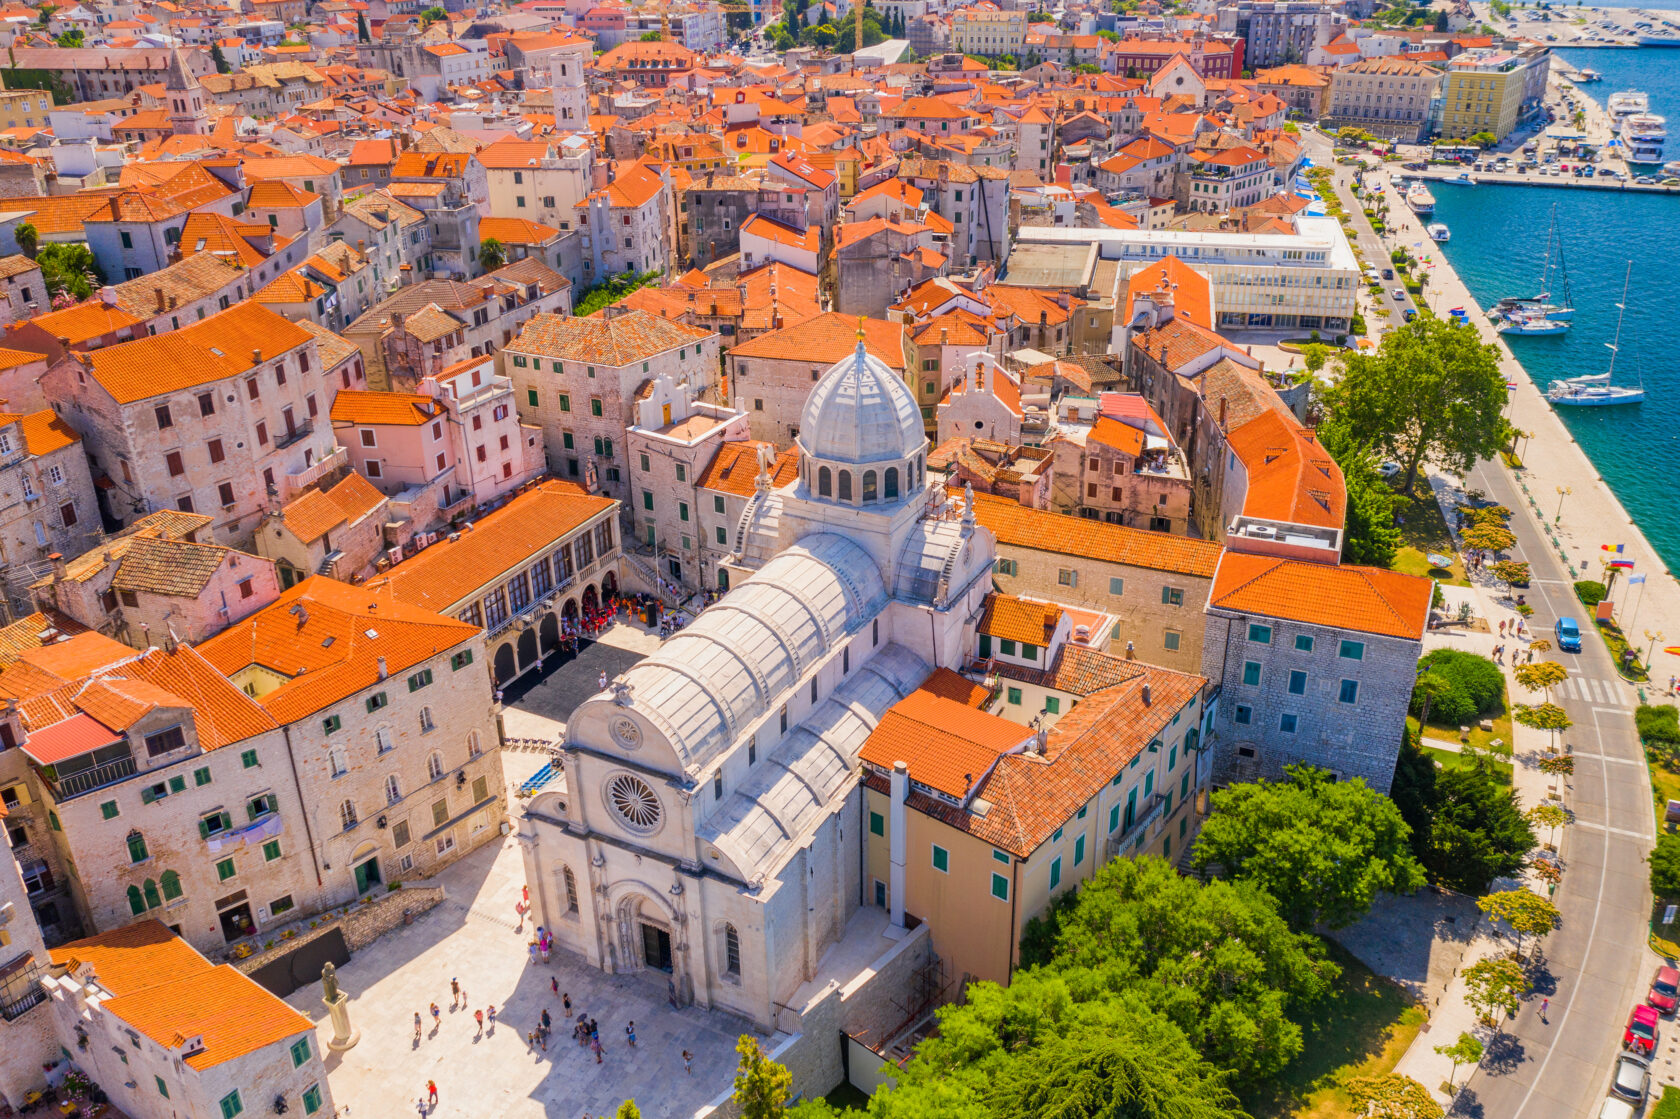 A panoramic view of the town center and cathedral of St James in Sibenik, Croatia (an Atlantis site).